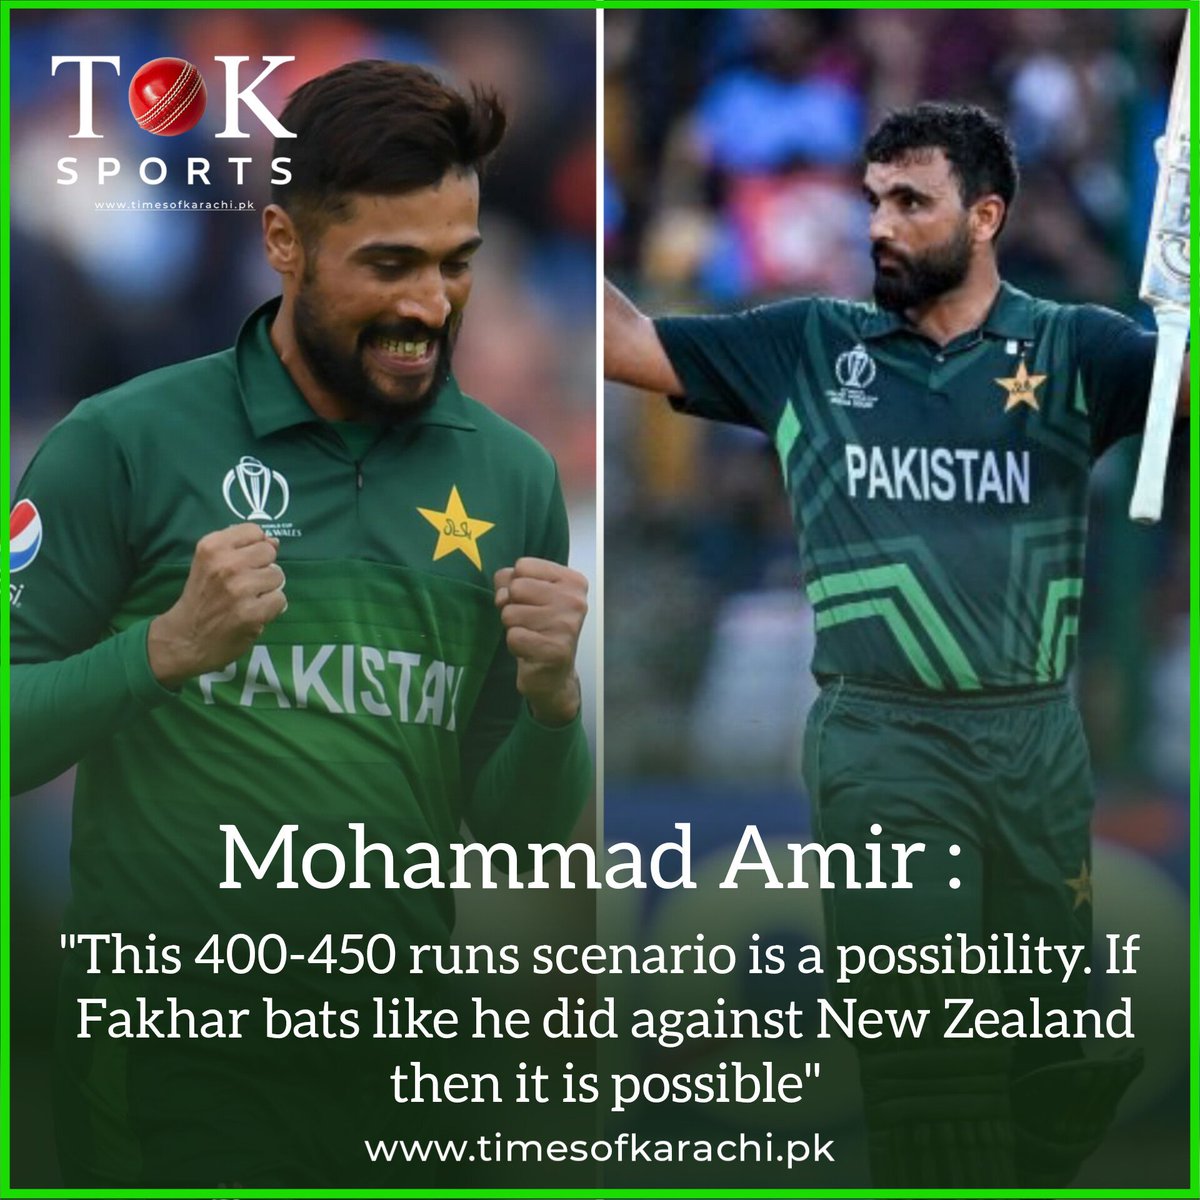 Amir: 'It's possible in cricket. If we scor 400 and get England out for 112. If Fakhar bats like he did against New Zealand then it is possible. But it's only  if we bat first.'

#TOKSports #MohammadAmir #FakharZaman #PAKvENG #CWC2023